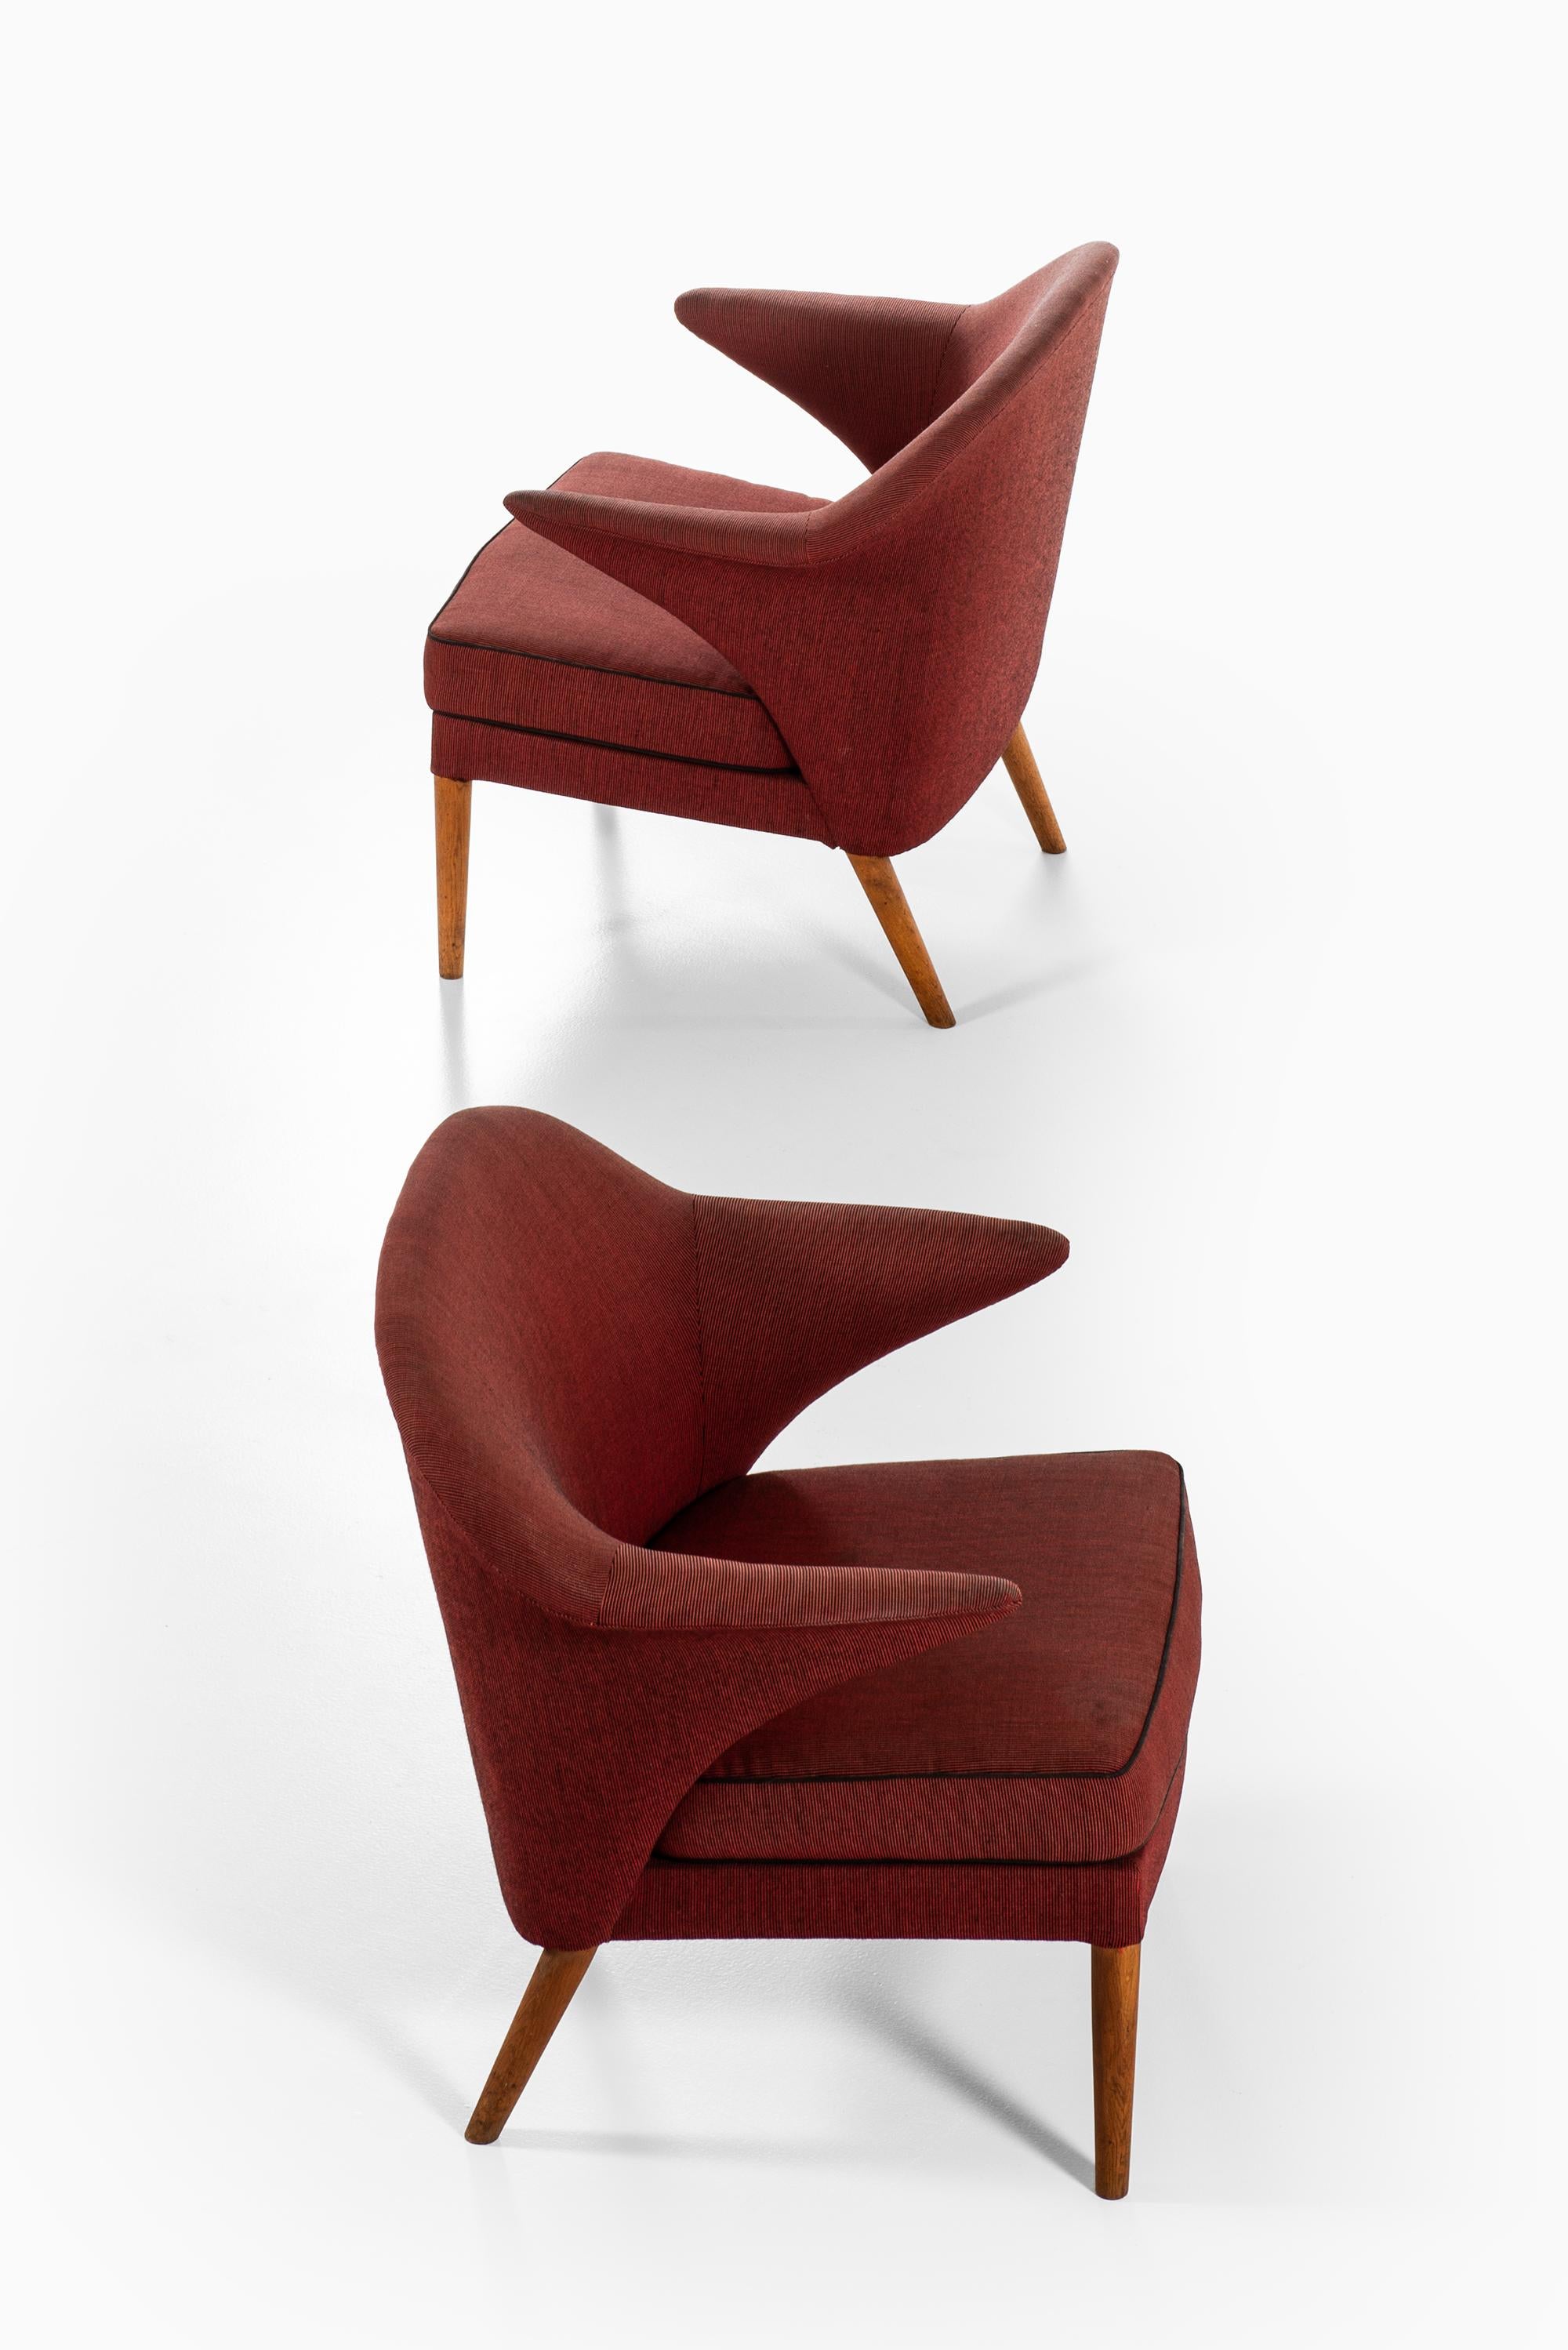 Mid-20th Century Hans Olsen Attributed Pair of Easy Chairs Produced in Denmark For Sale